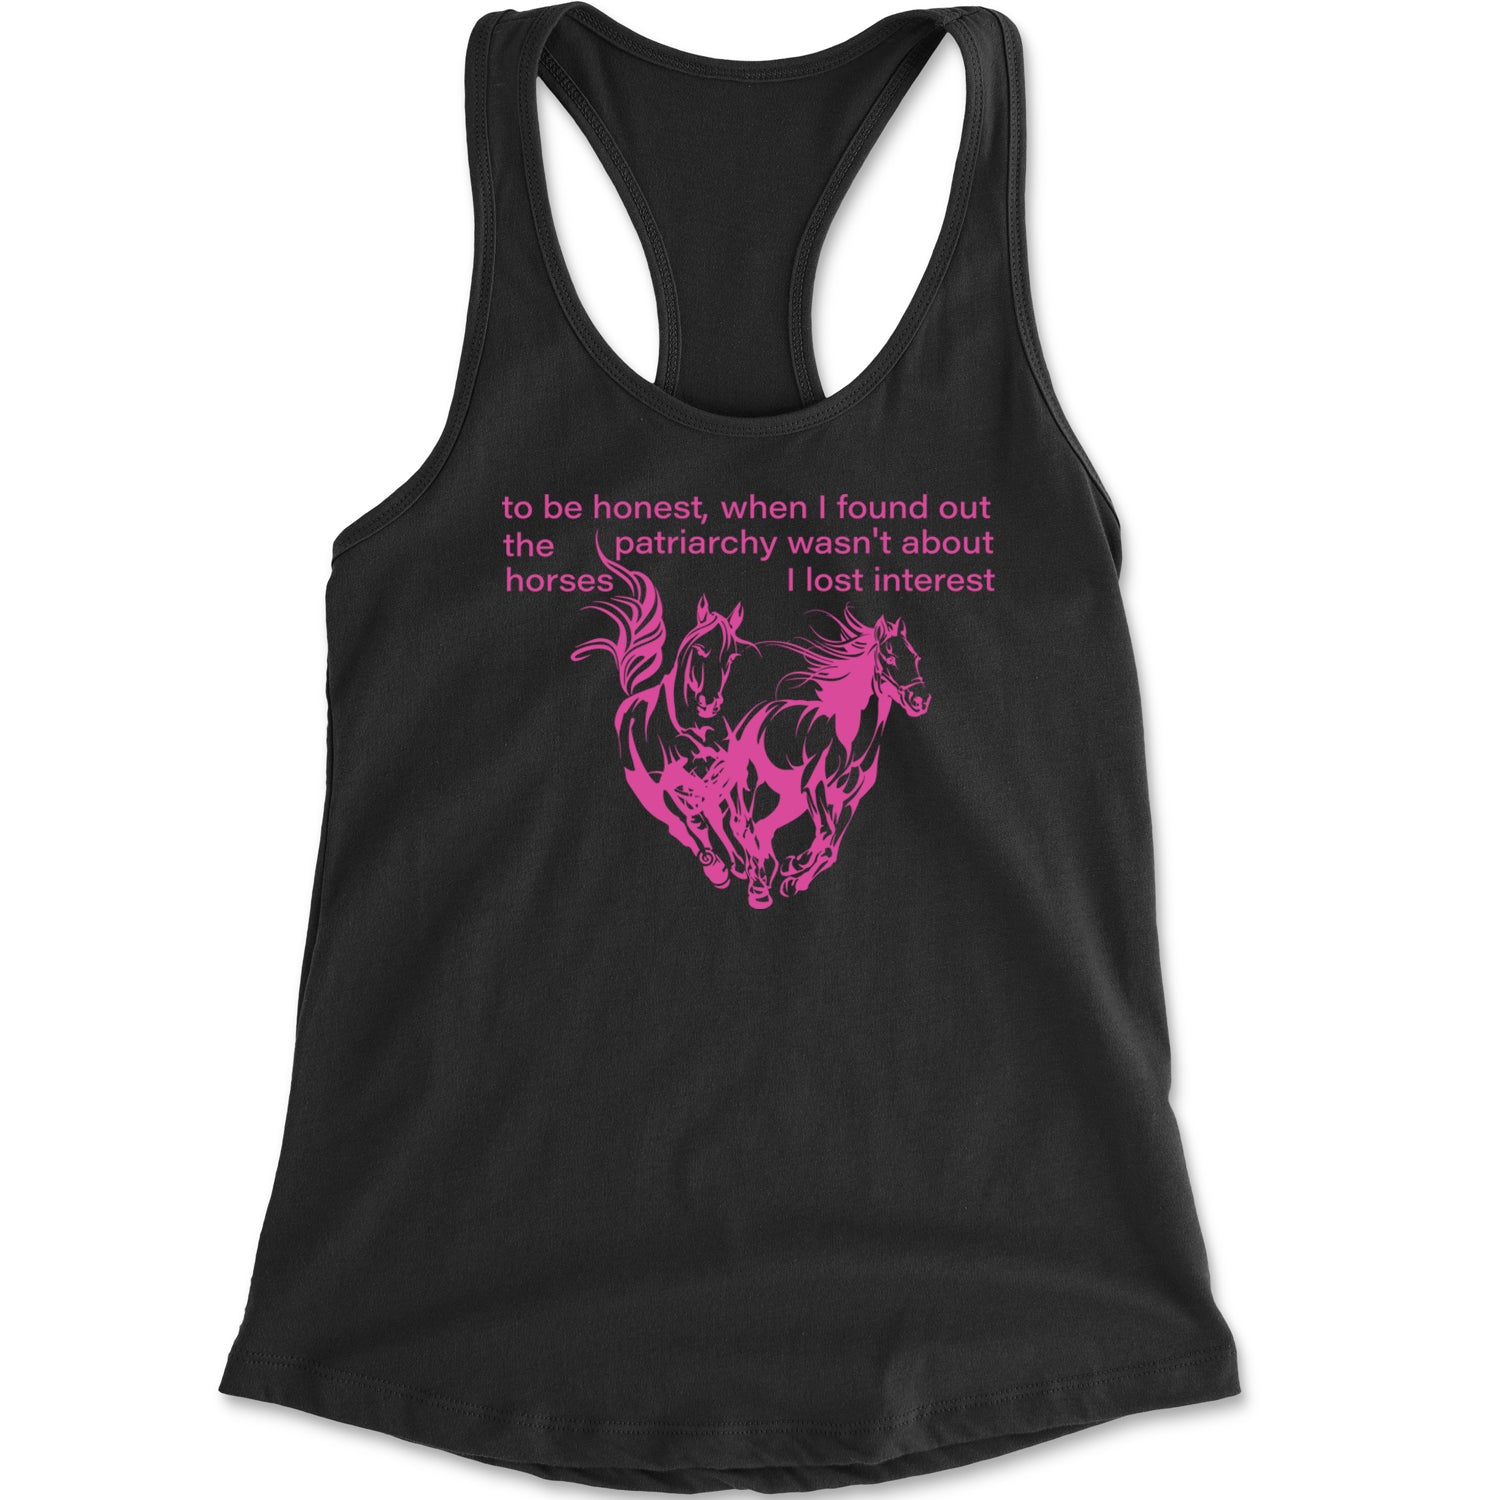 The Patriarchy Wasn't About Horses Barbenheimer Racerback Tank Top for Women